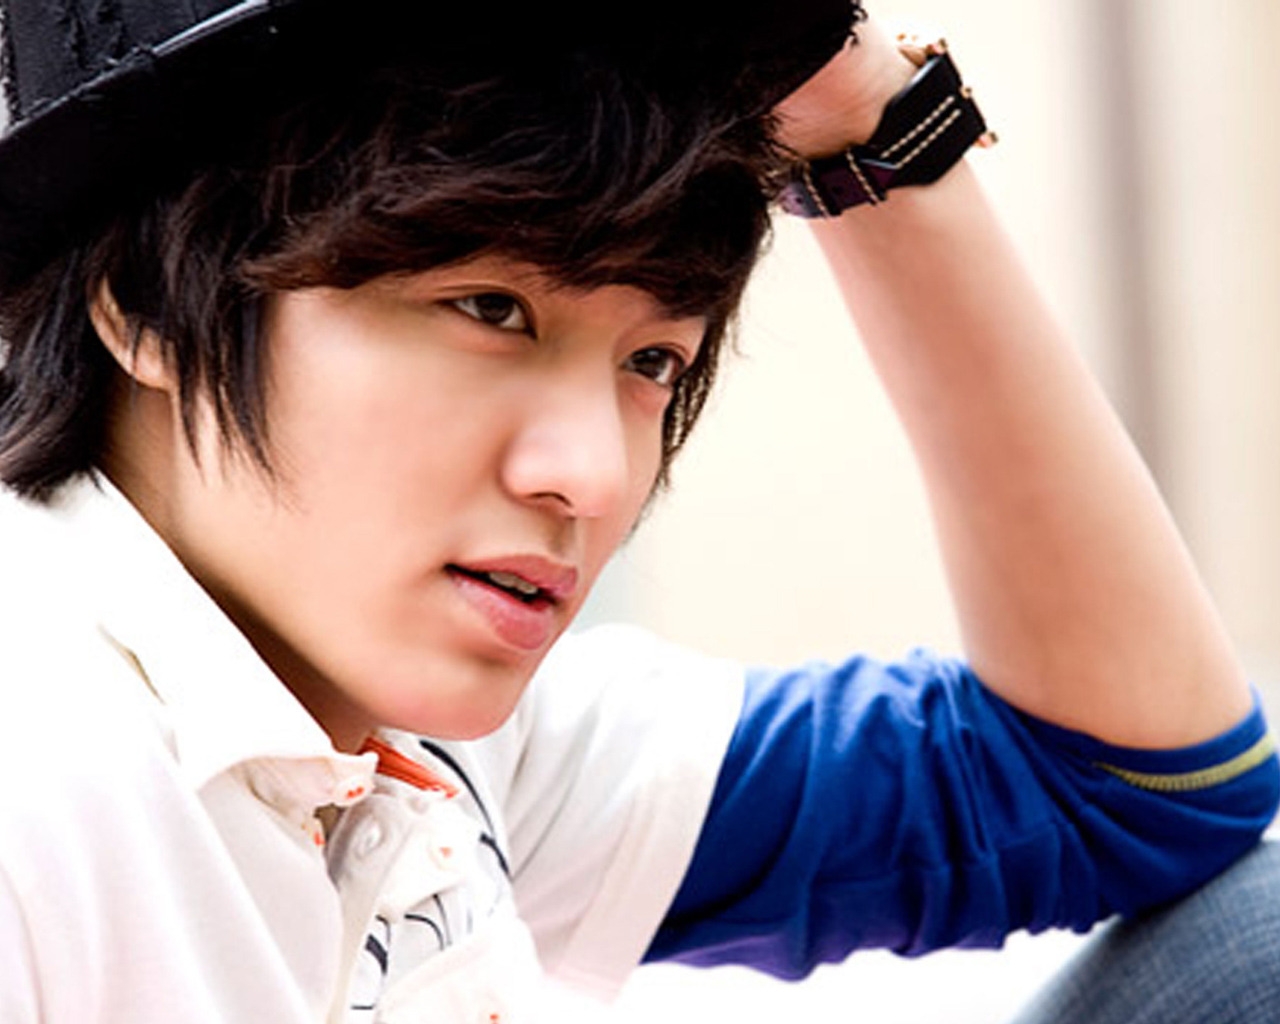 Lee Min Ho Profile Look for 1280 x 1024 resolution